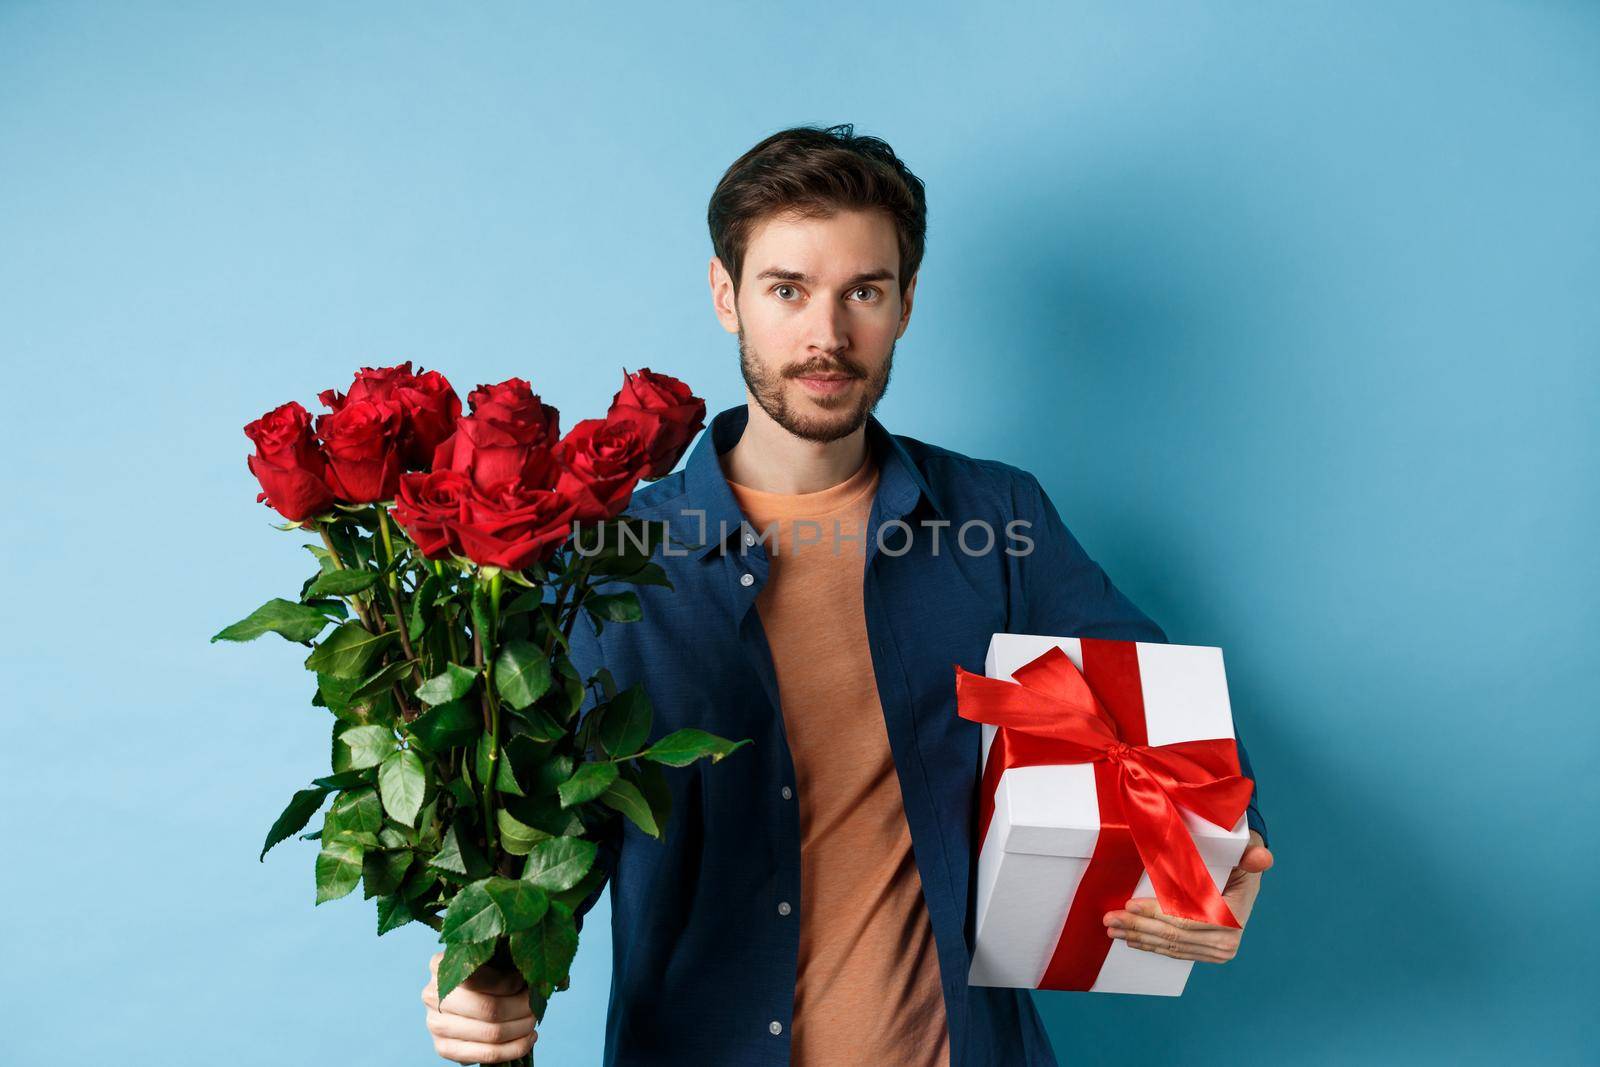 Romance and valentines day. Man presenting bouquet of red roses to lover. Boyfriend bring flowers and gift on romantic date, standing over blue background.